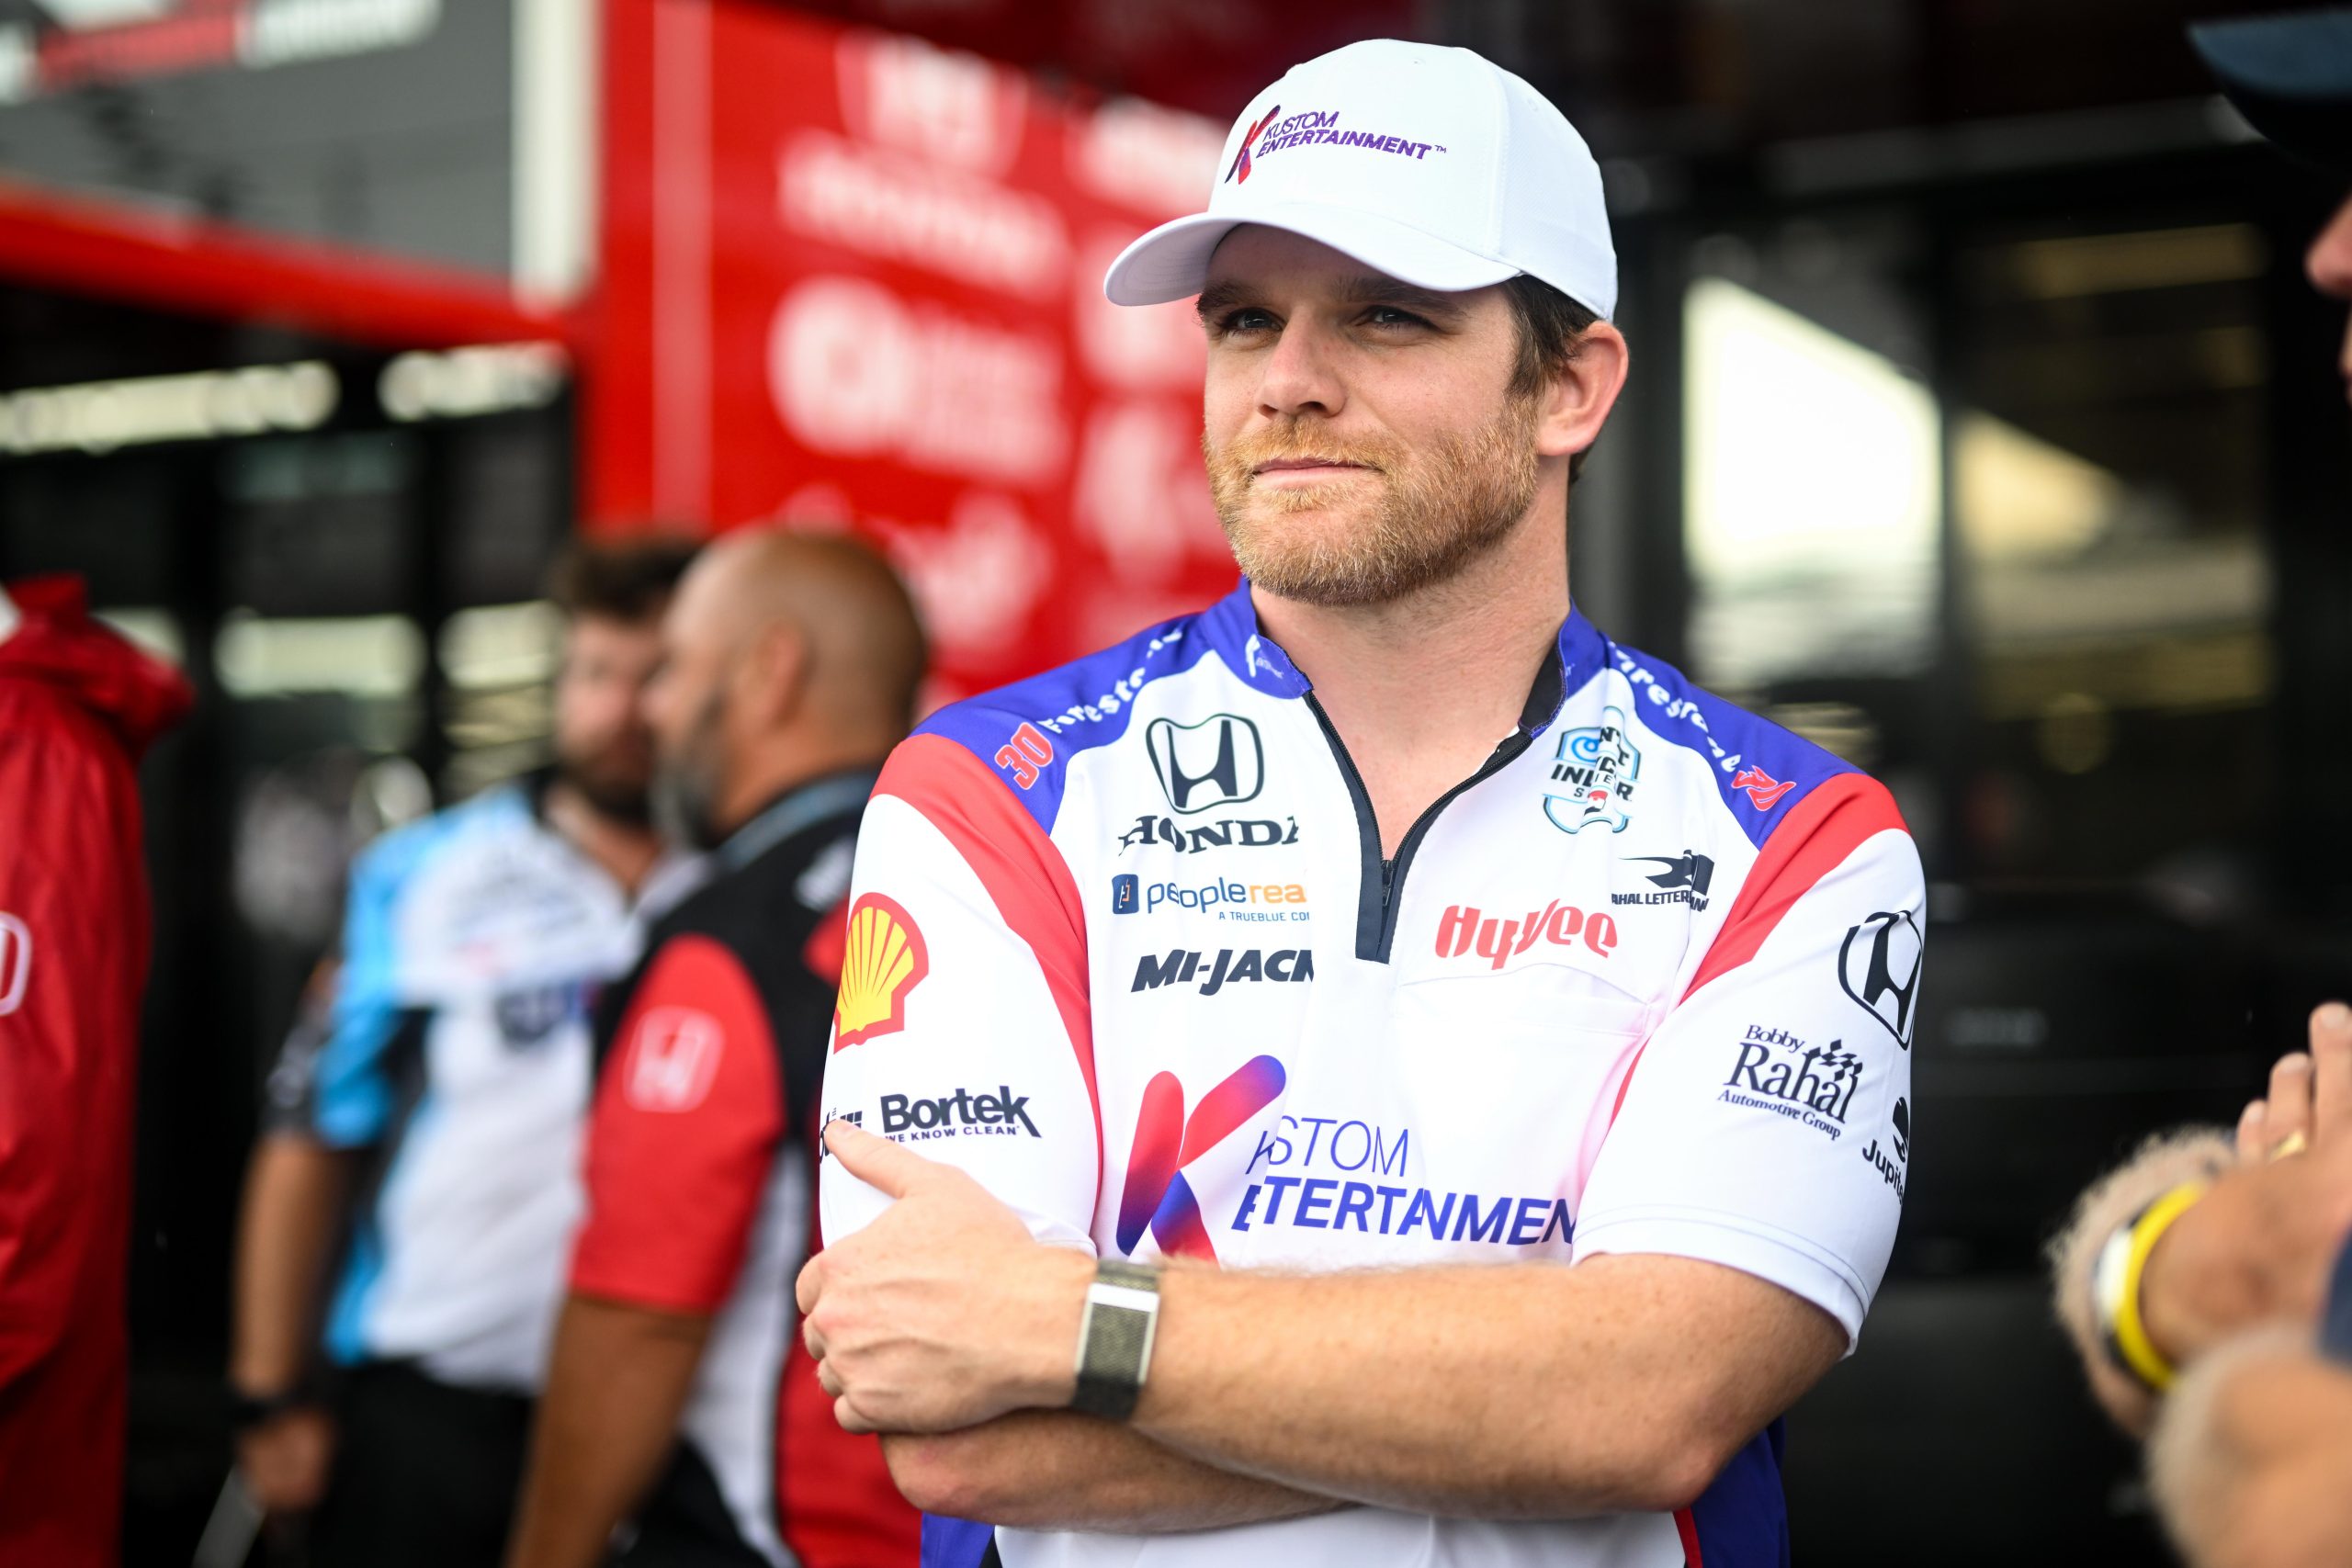 IndyCar Driver Conor Daly who will play in the NBA Celebrity All-Star Game